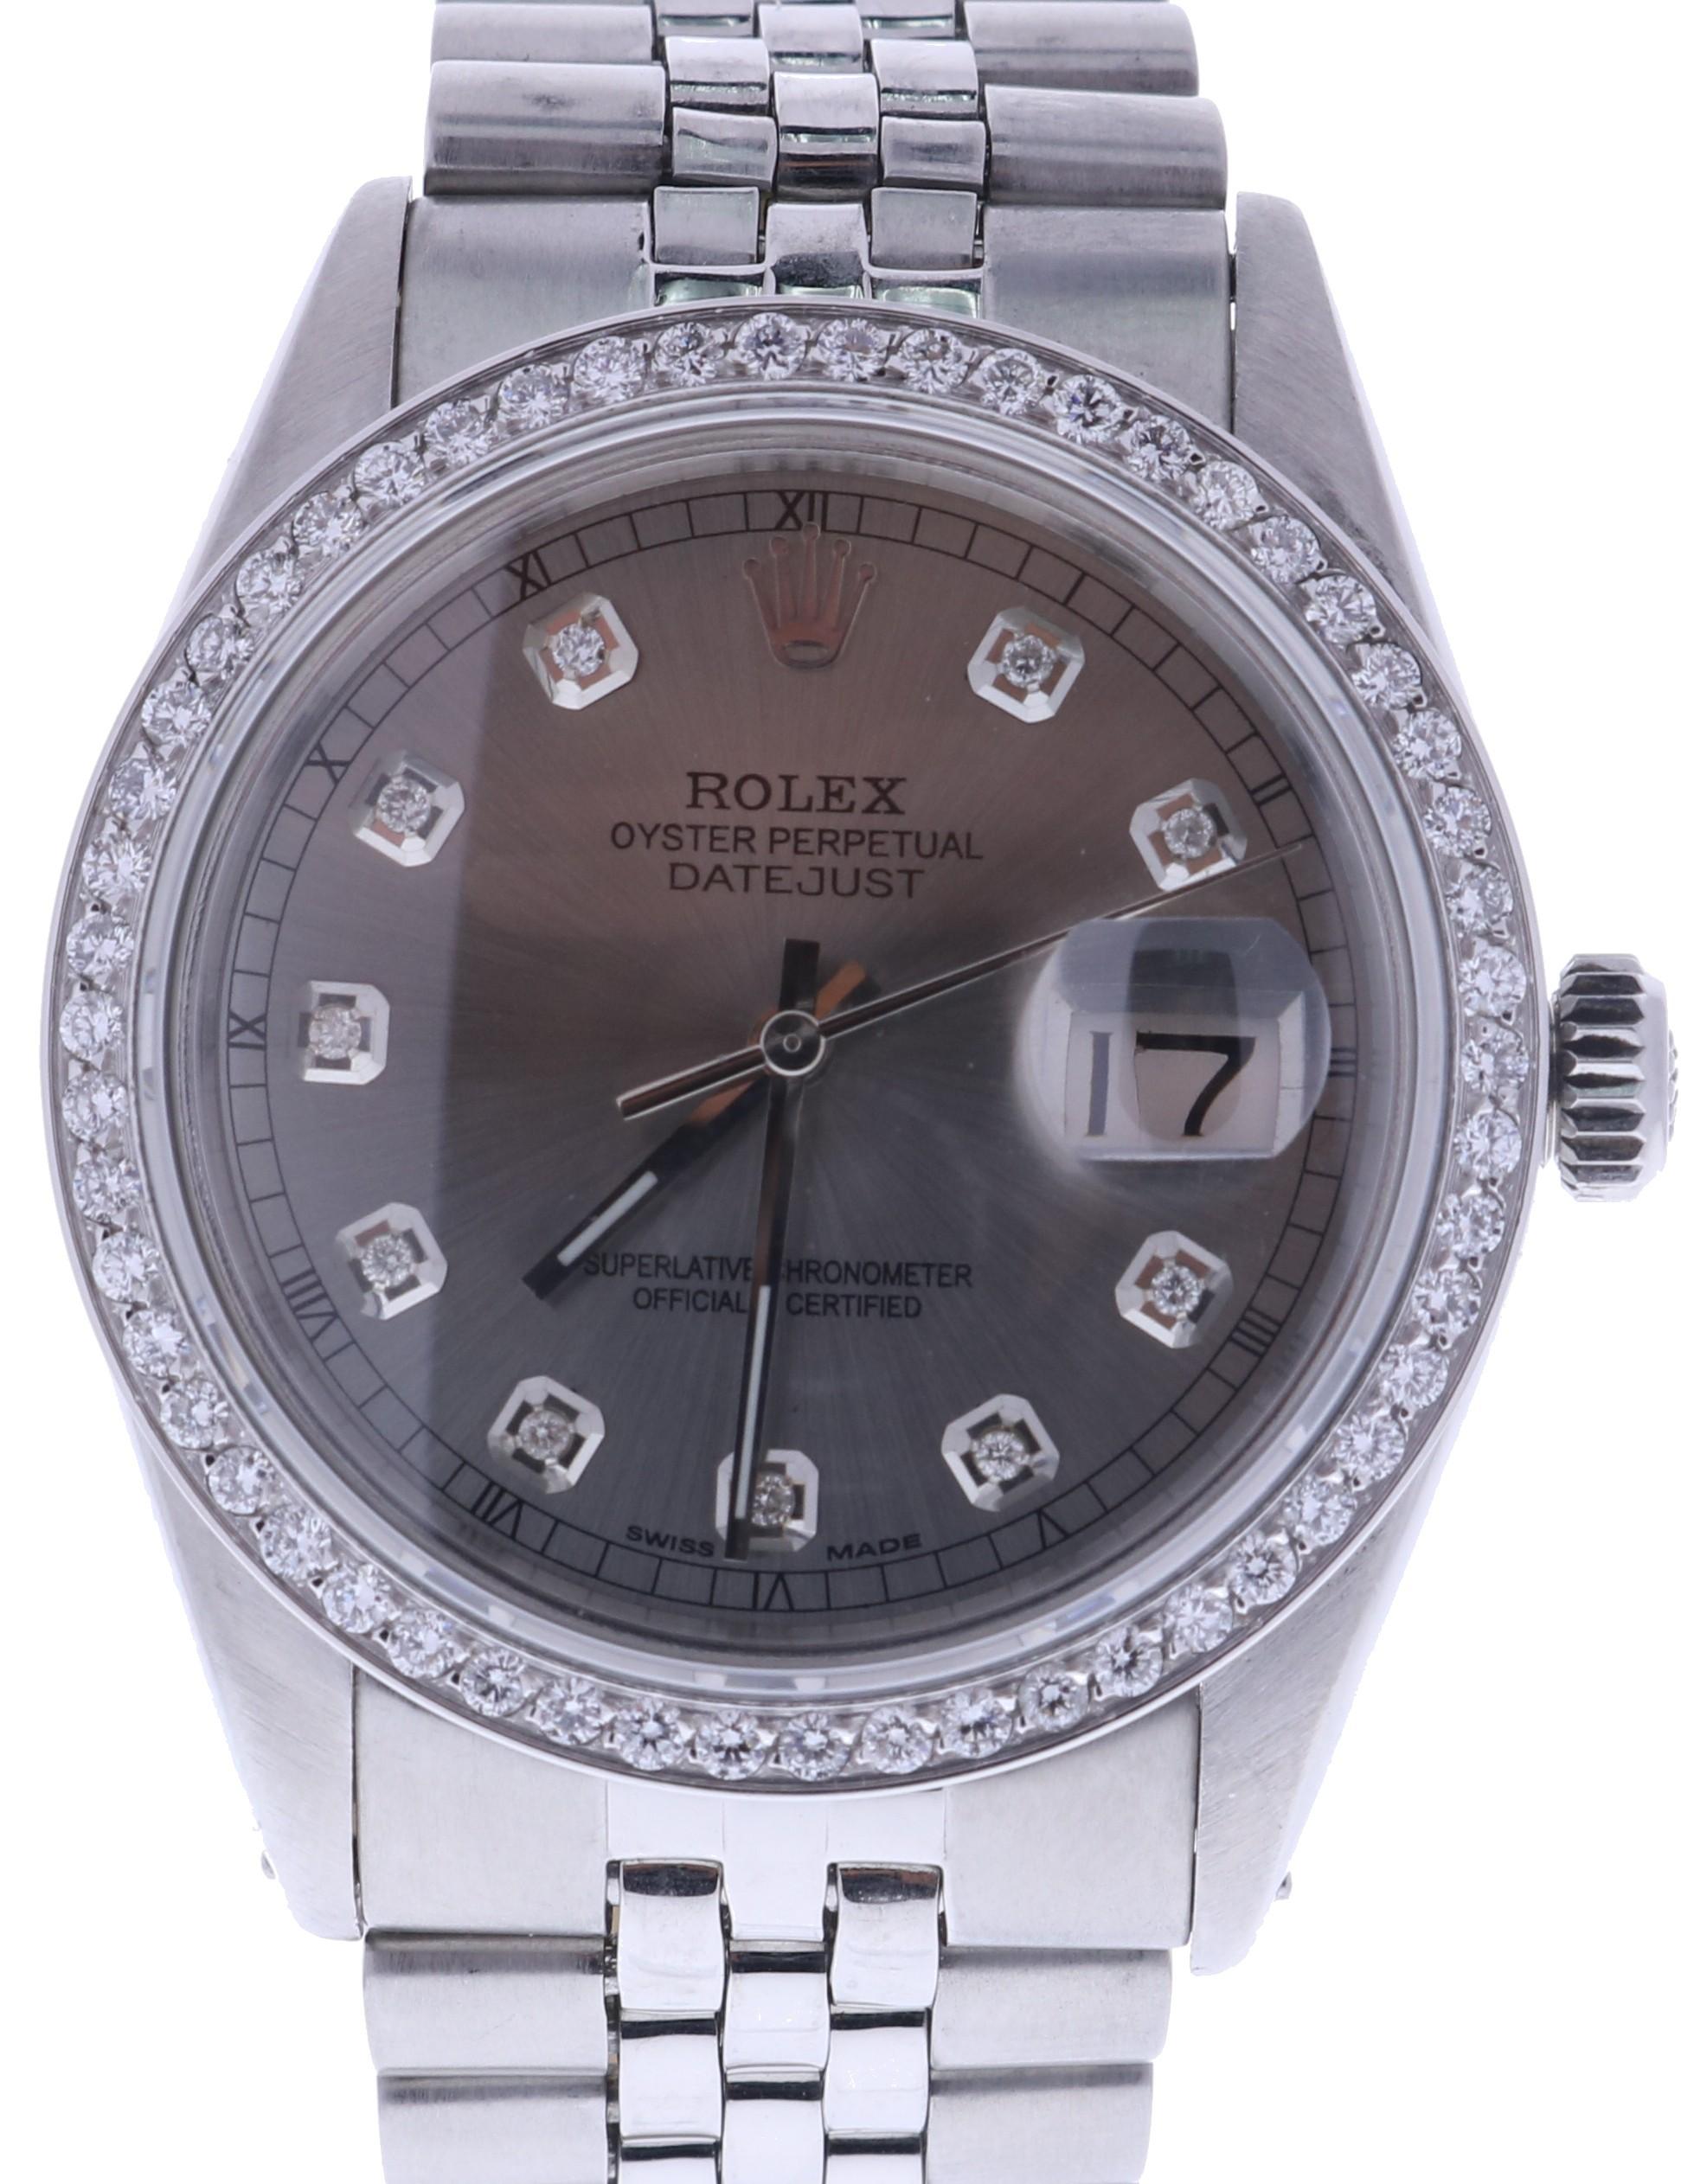 Certified 1979 Rolex Datejust 16014 Grey Dial In Fair Condition For Sale In Miami, FL